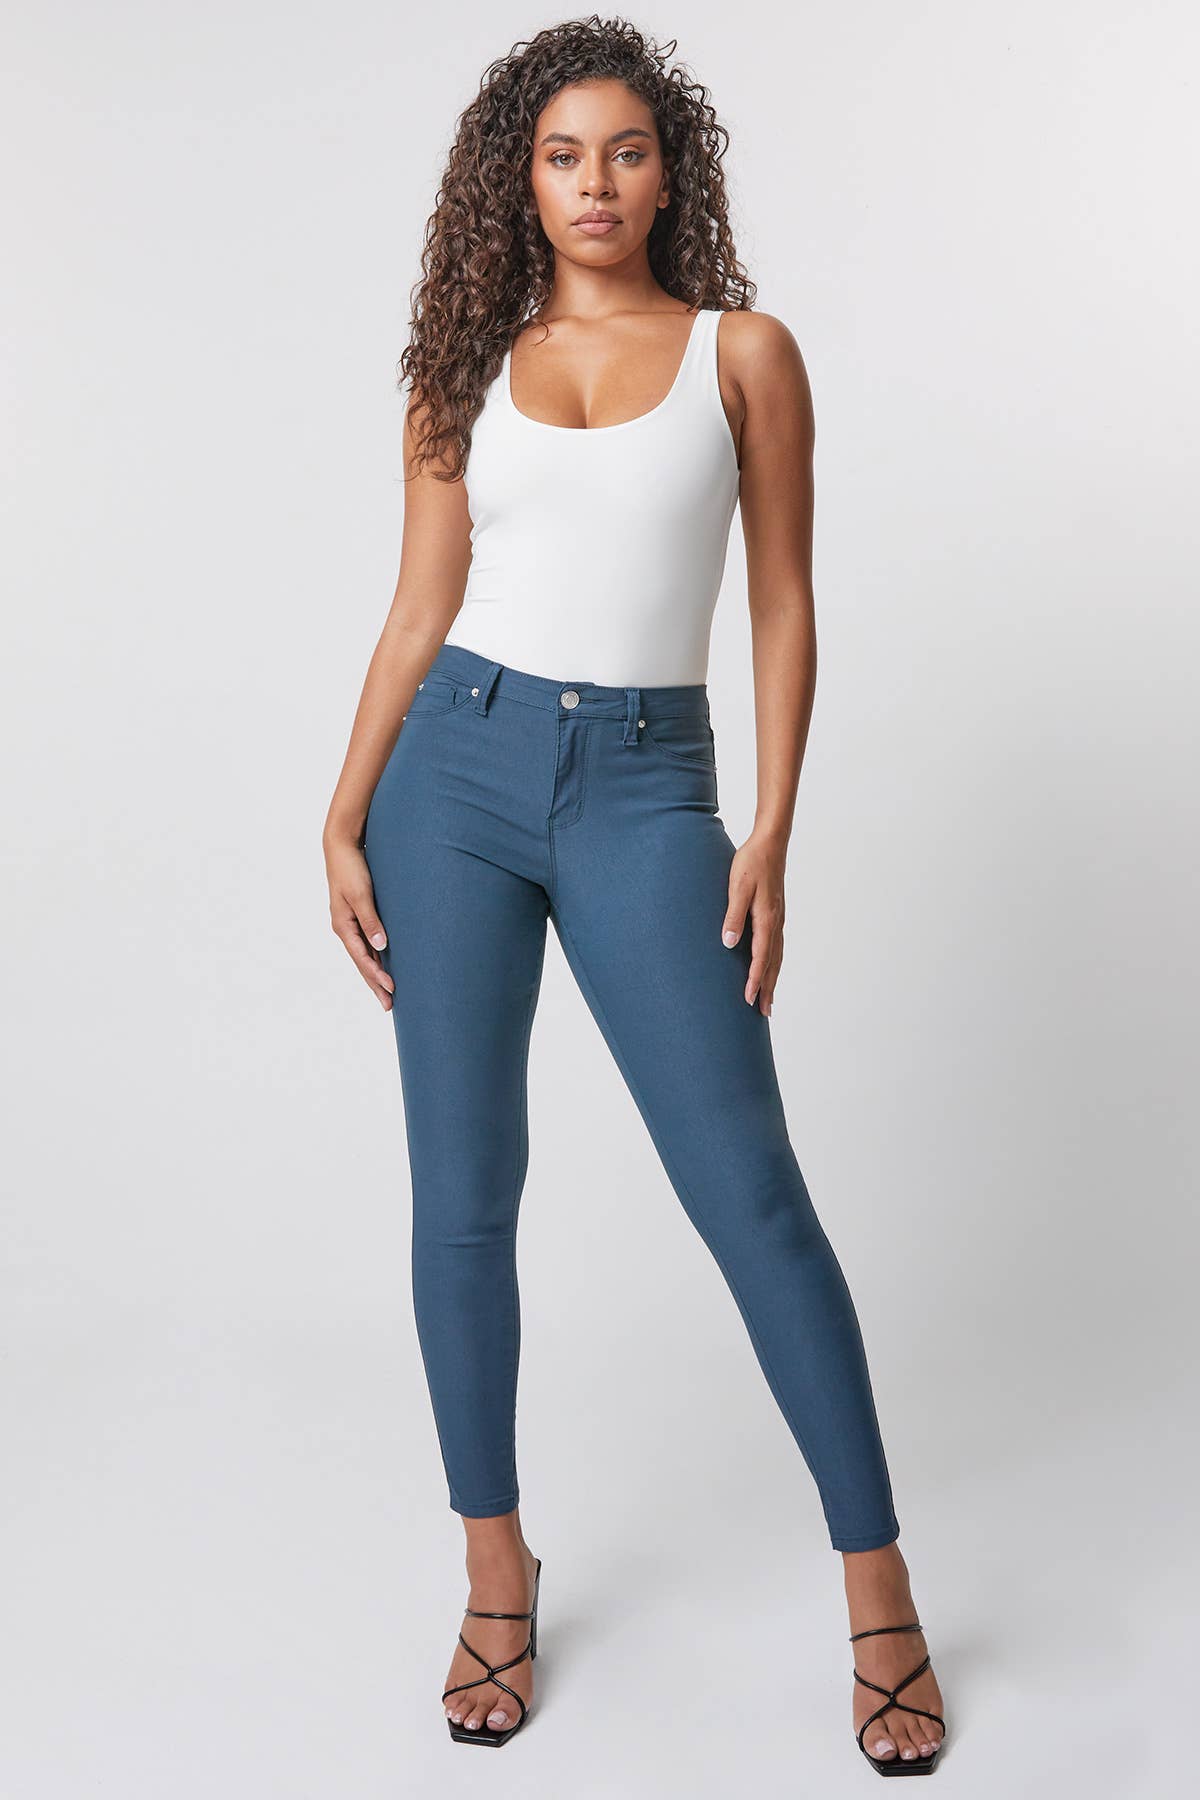 Junior Hyperstretch Mid-Rise Skinny Jean: ExtraLarge / BROSE